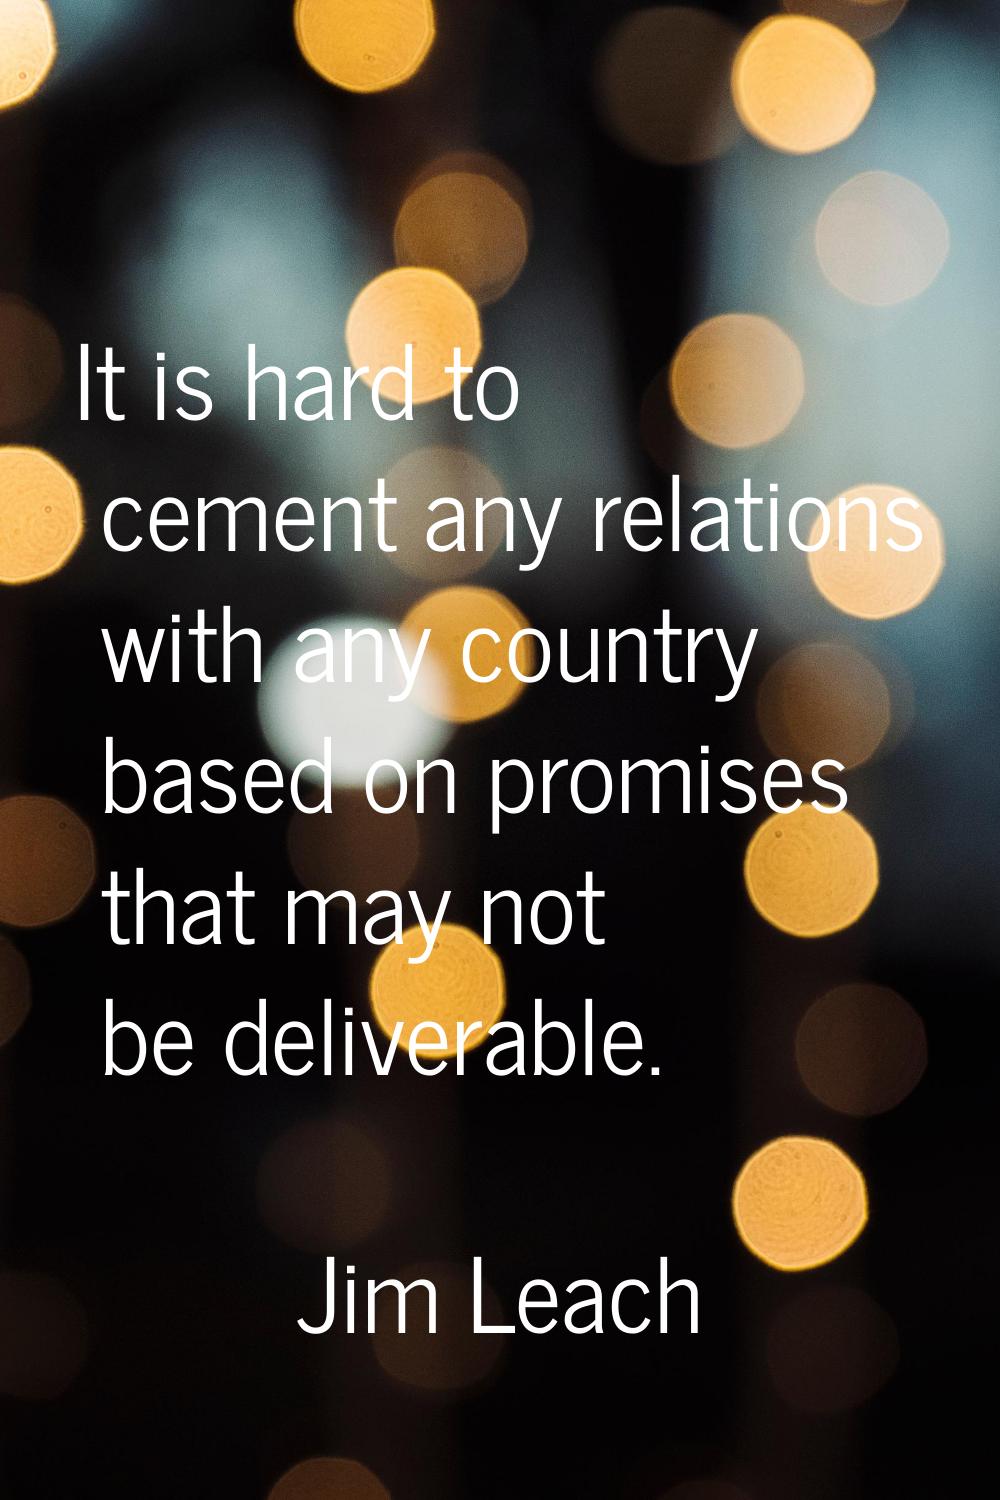 It is hard to cement any relations with any country based on promises that may not be deliverable.